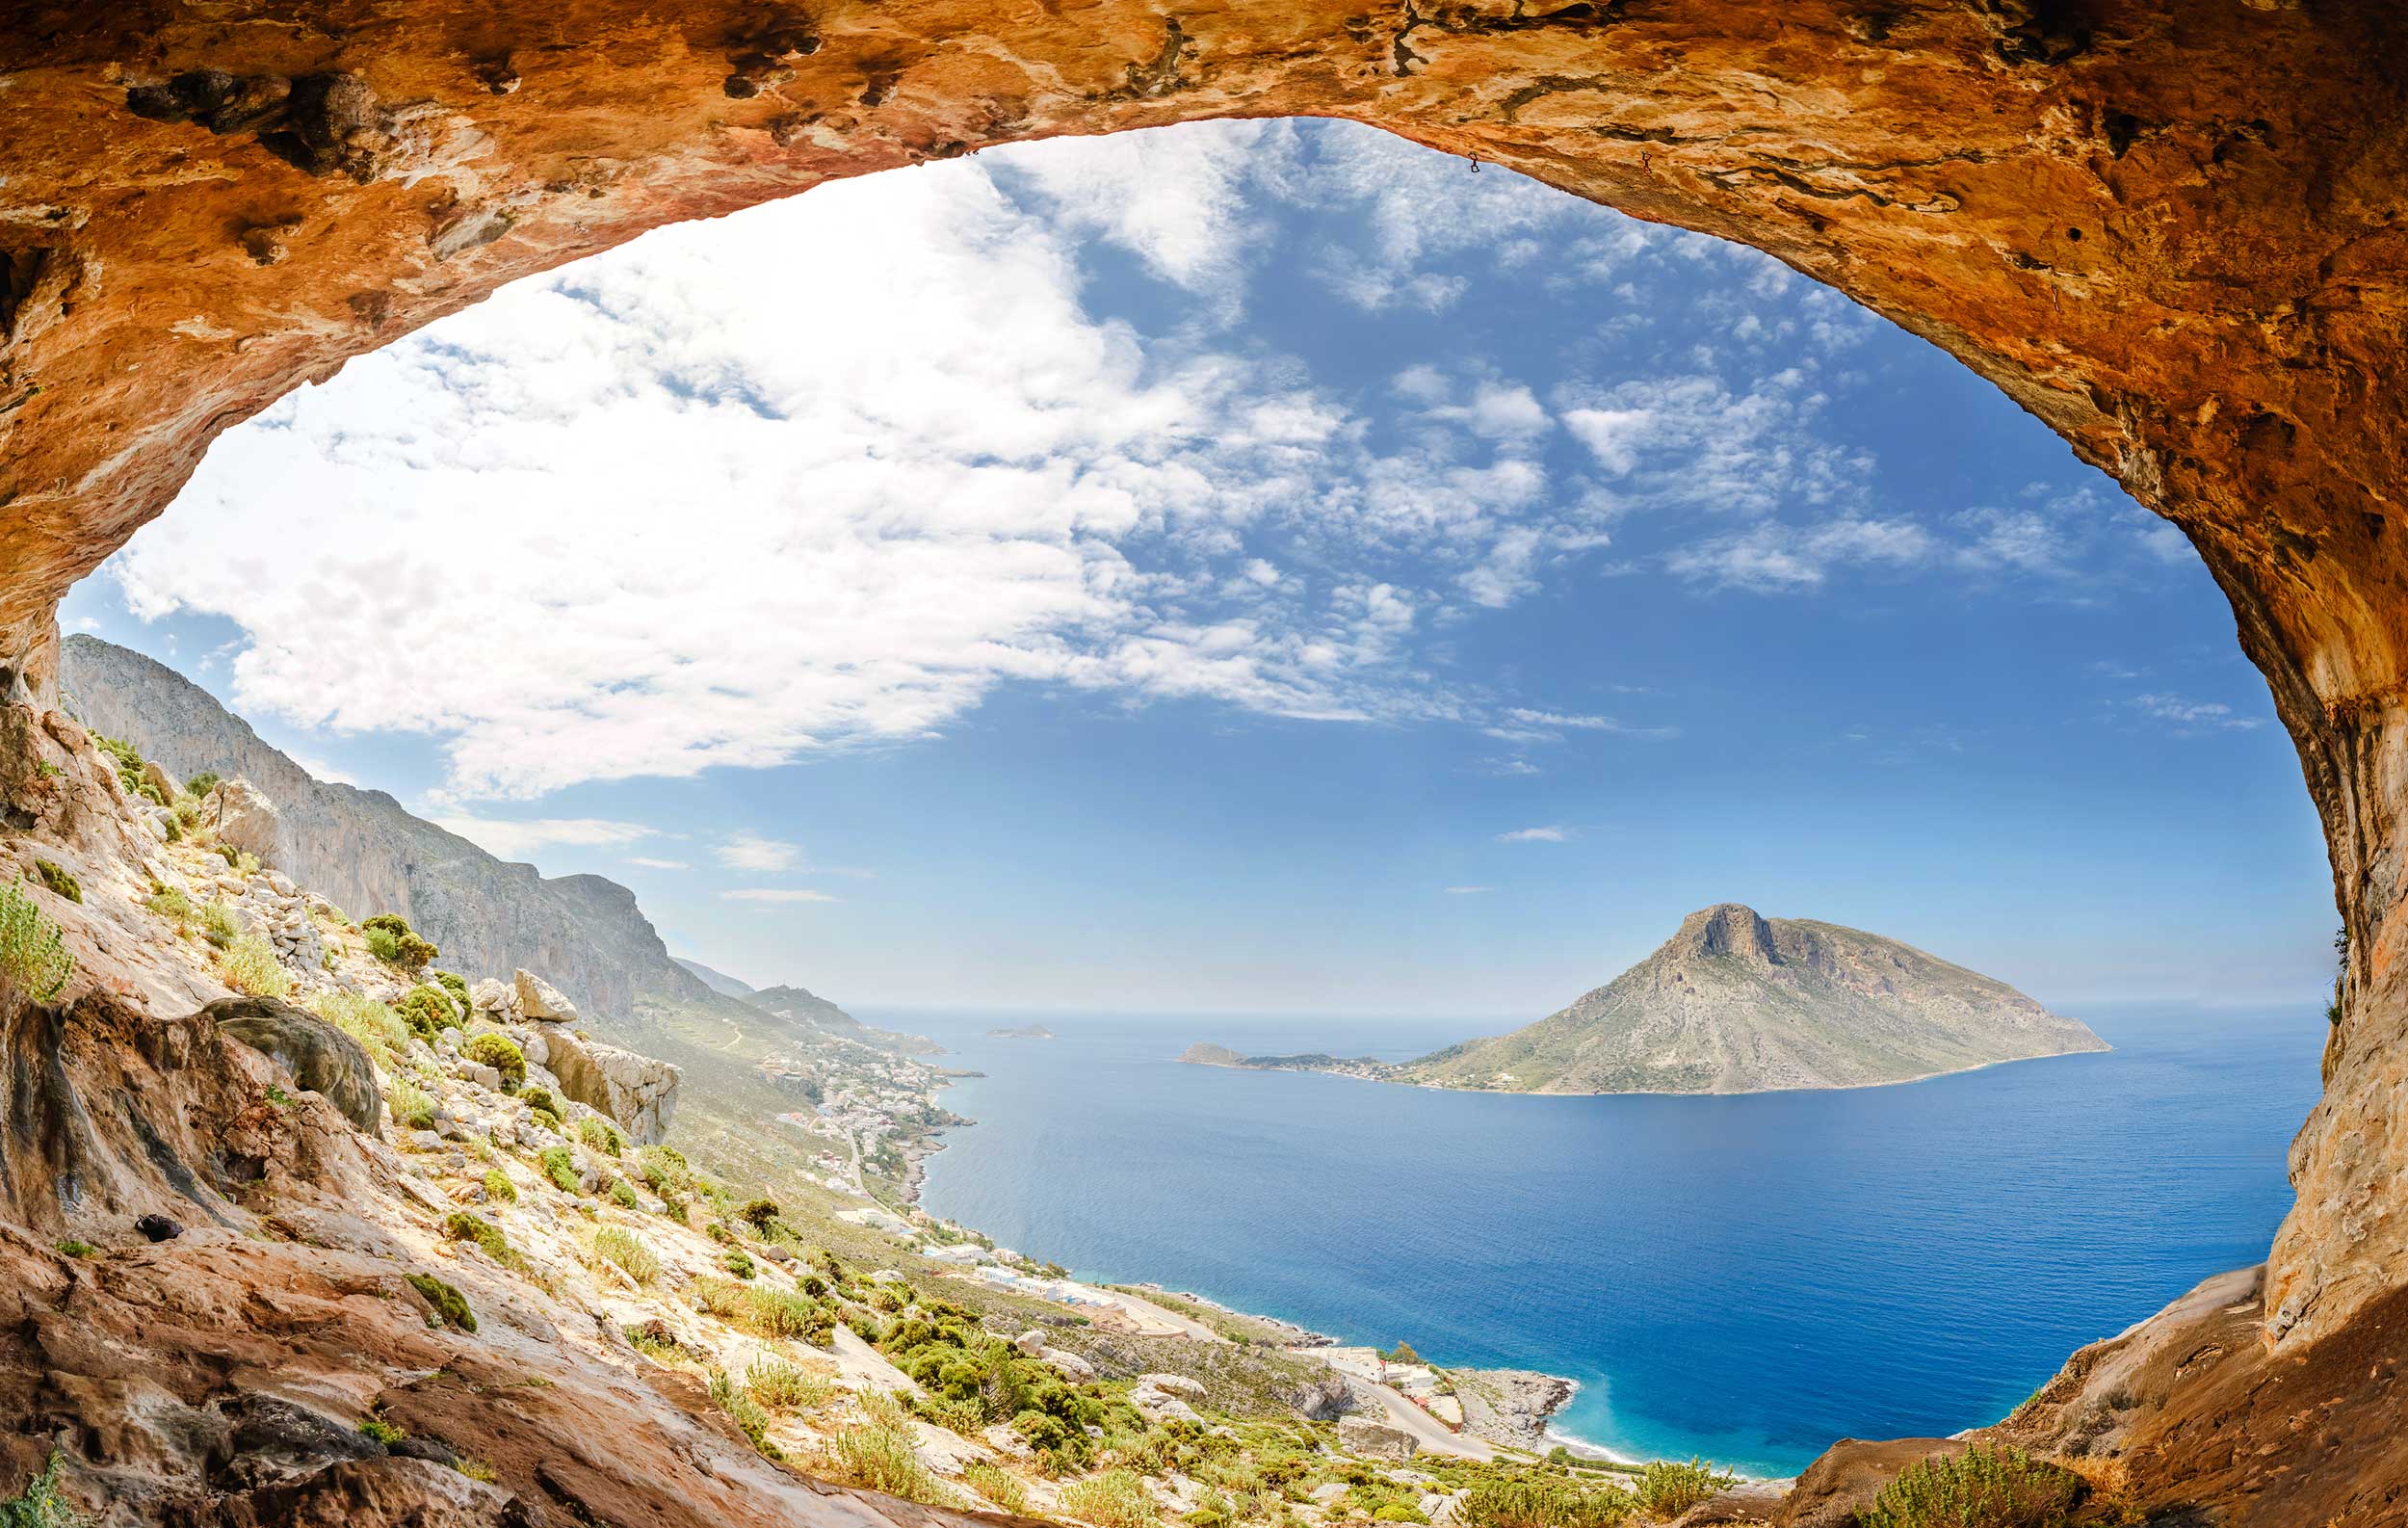 View through a stone archway to a small island out in the sea in Greece